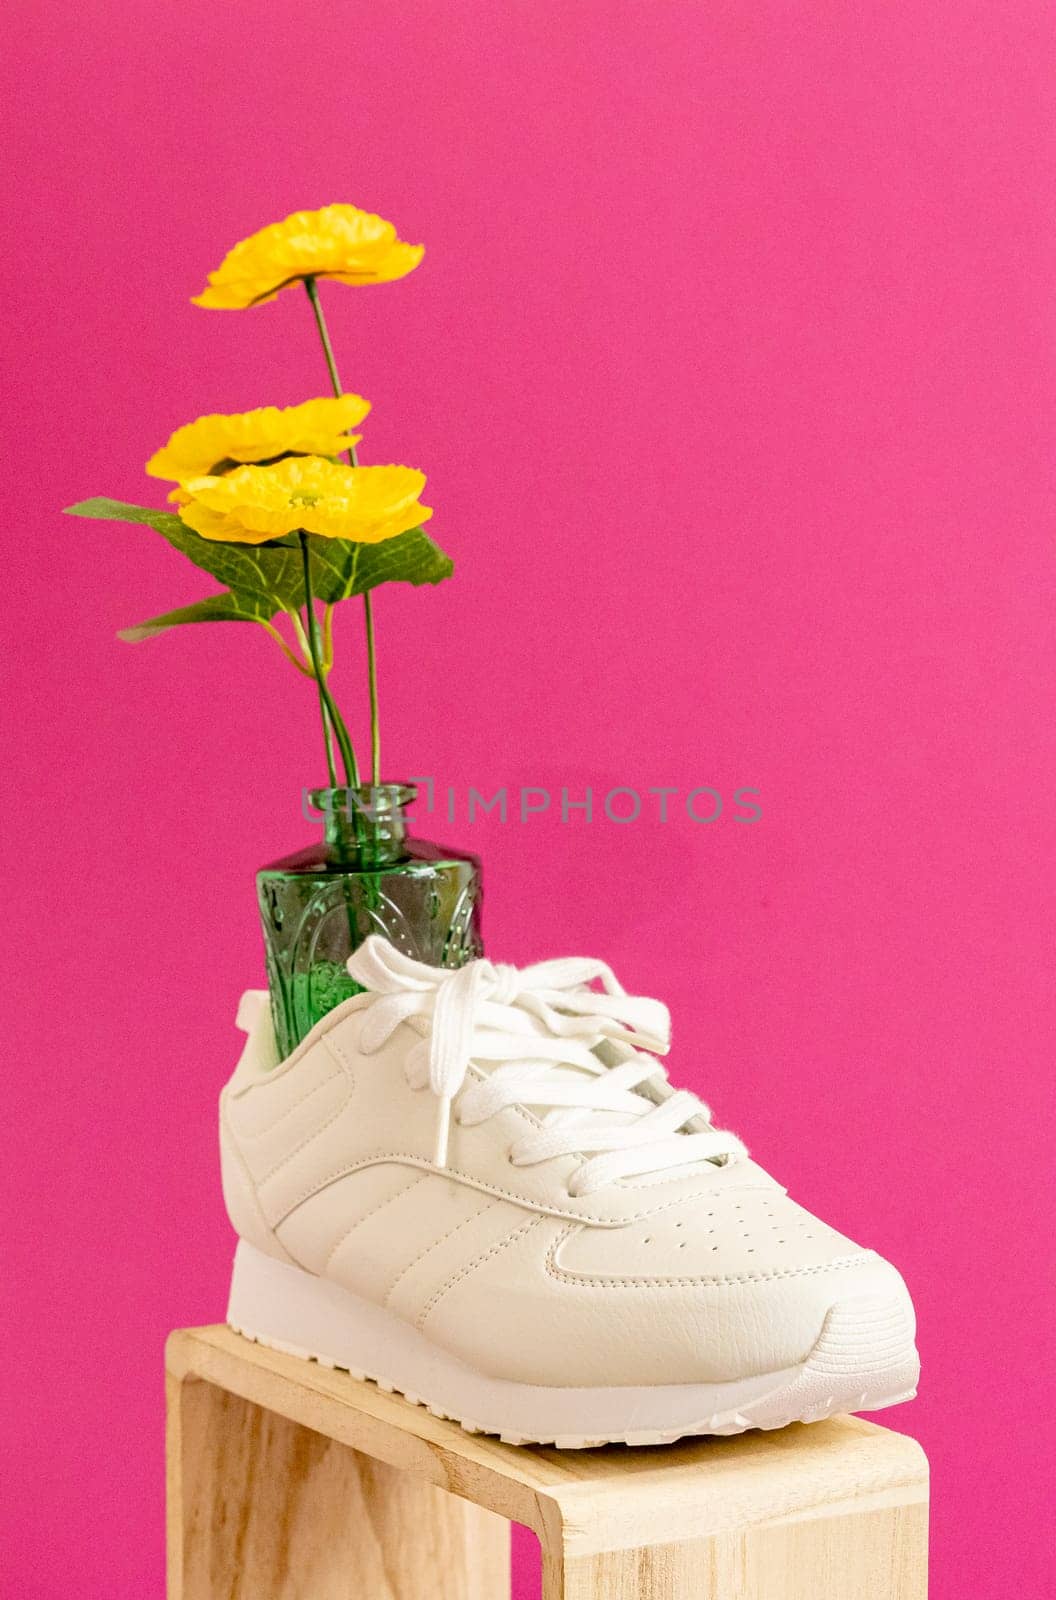 One modern fashionable white sneakers on a wooden box with a vase of yellow flowers in them stand on a lilac-pink background, close-up side view. Fashionable shoes concept.